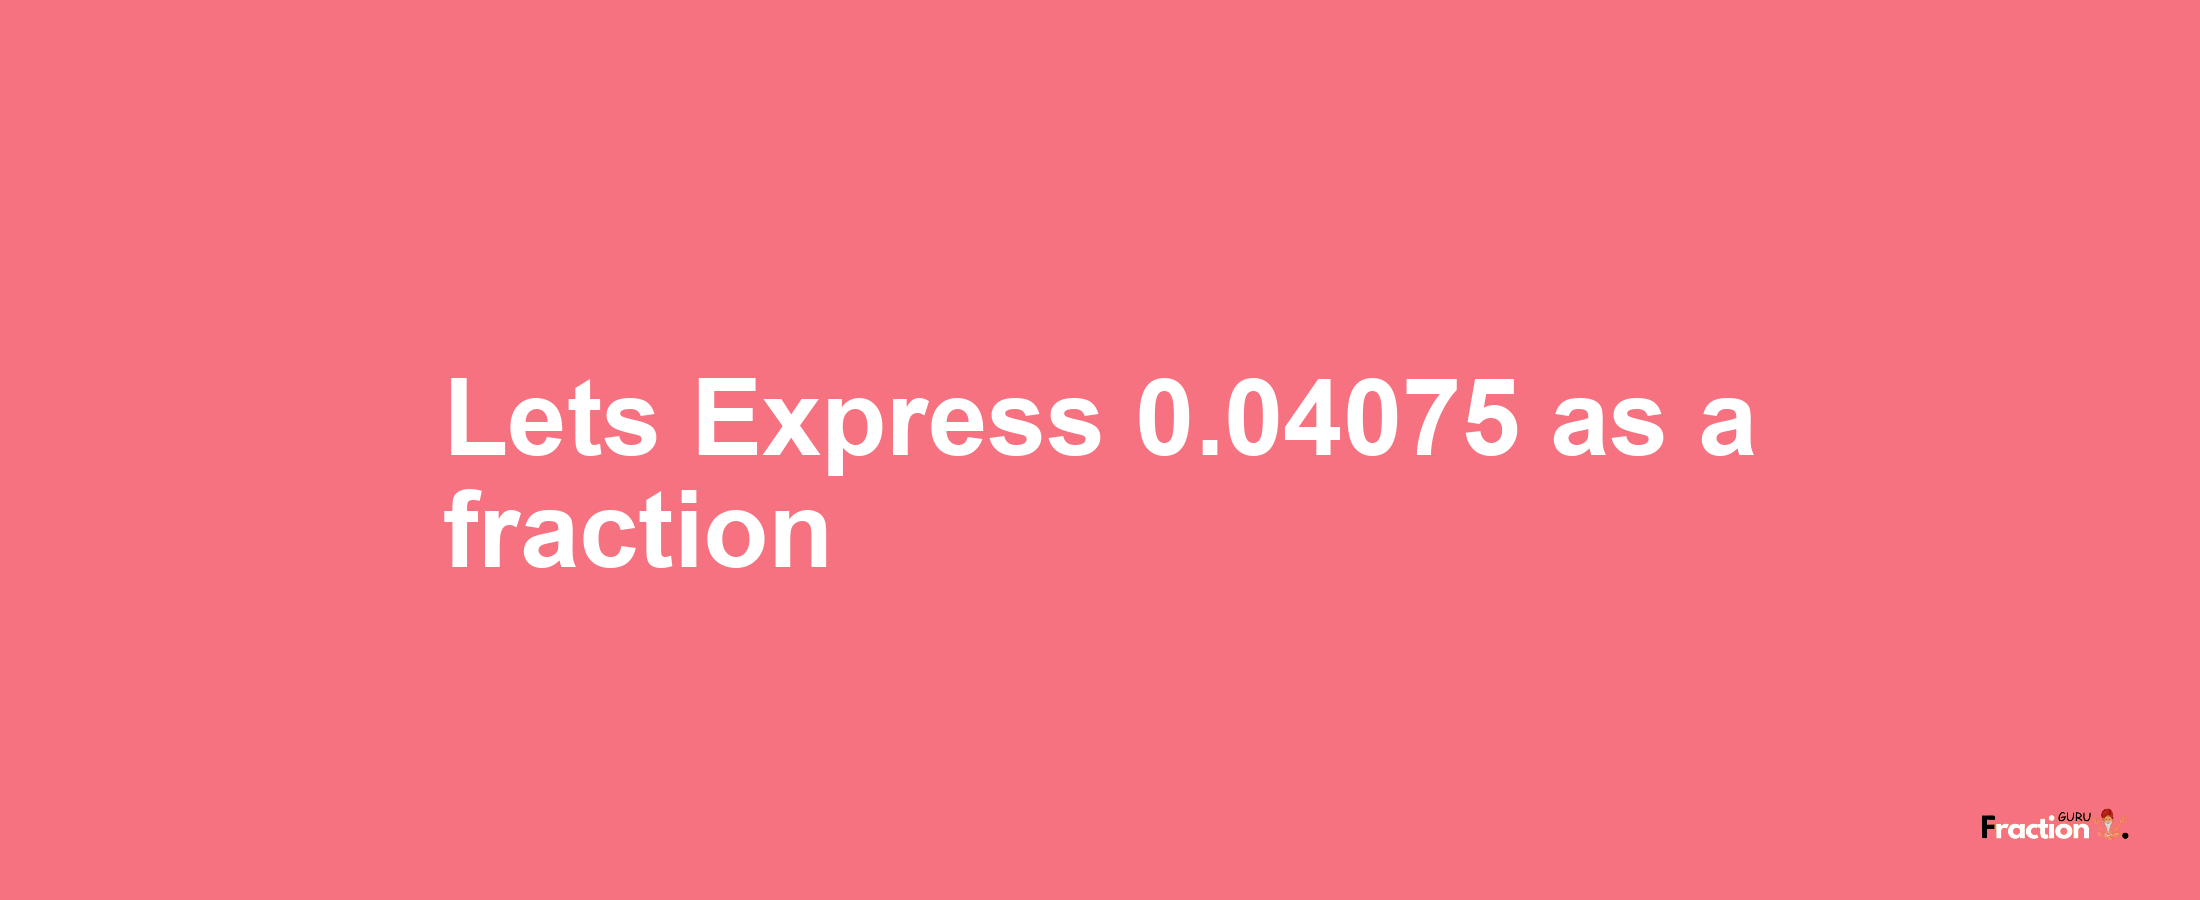 Lets Express 0.04075 as afraction